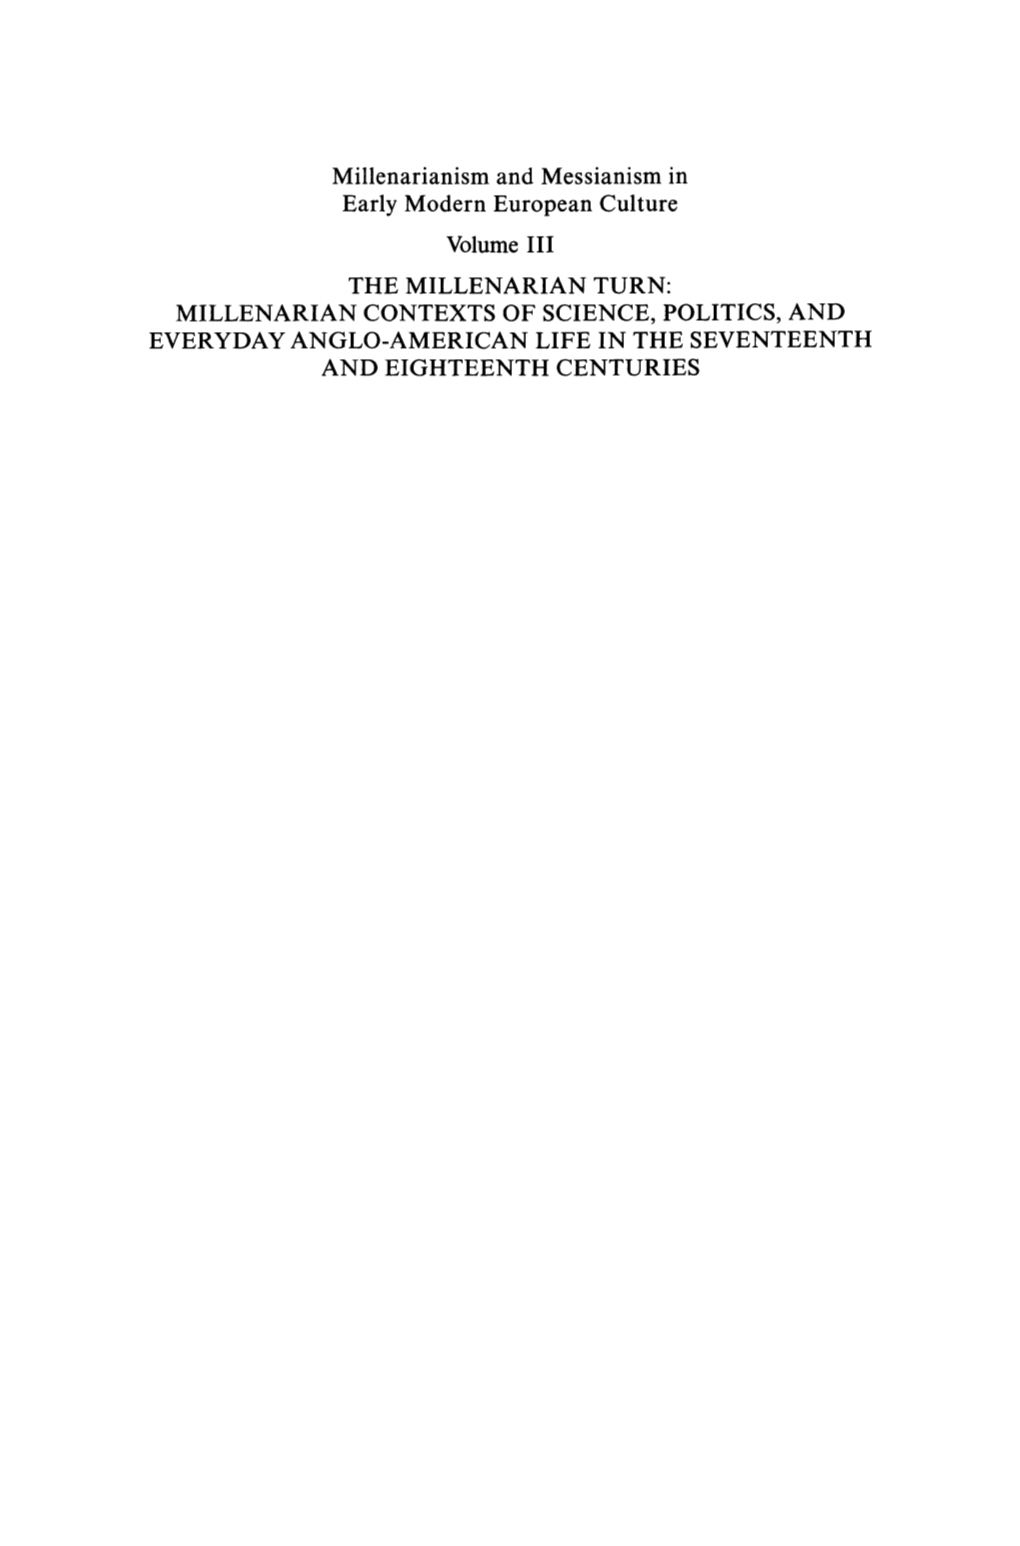 Millenarianism and Messianism in Early Modern European Culture Volume III the MILLENARIAN TURN: MILLENARIAN CONTEXTS of SCIENCE